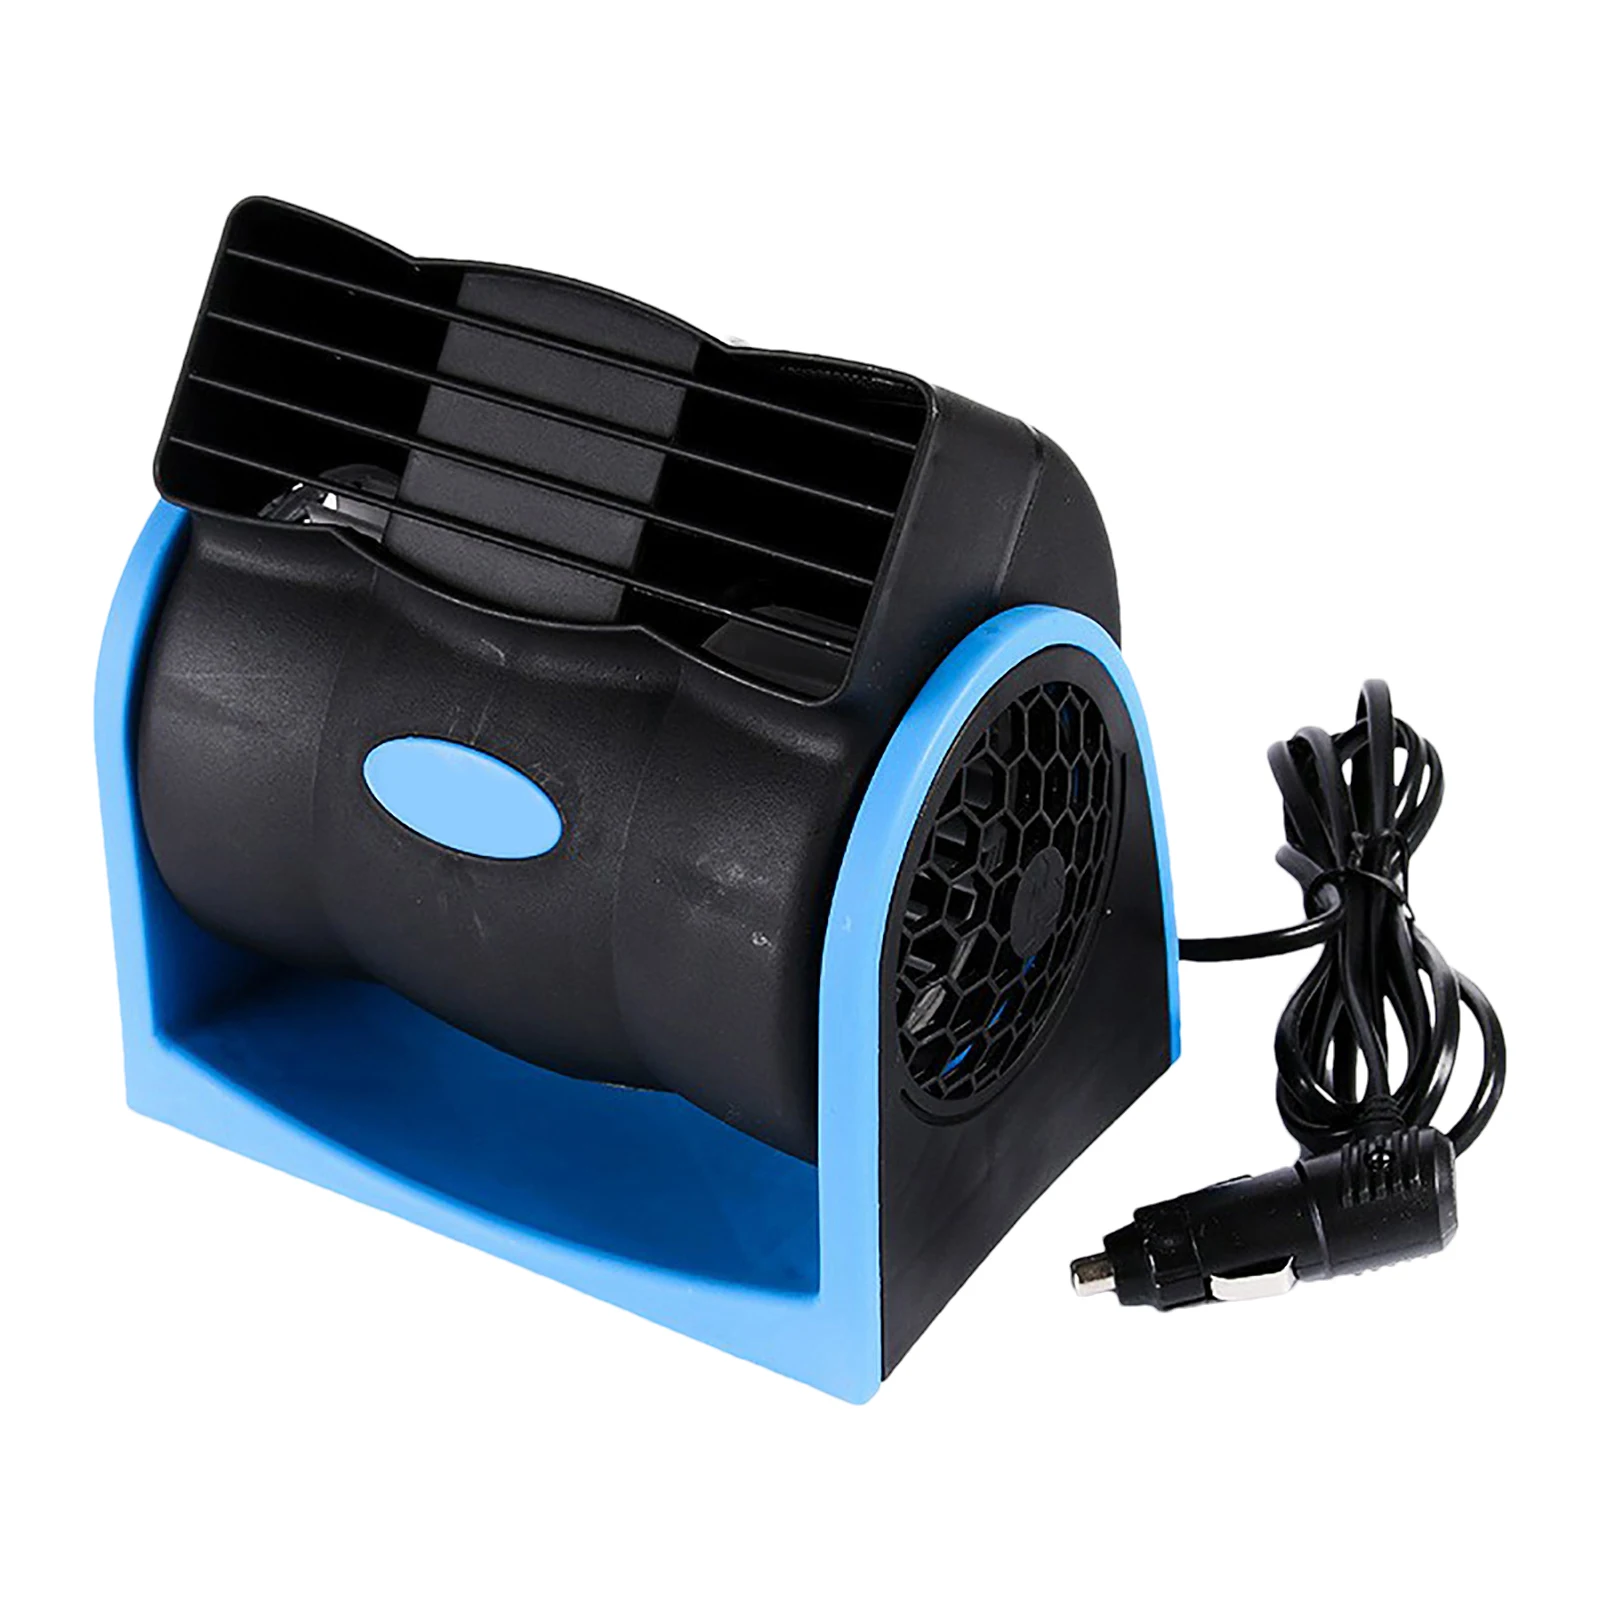 12/24V Electric Car Fan Vehicle Cooling Fan With Adjustable 2 Wind Speed Adjustable Car Air Conditioner Cooling Fan With 2 Speed